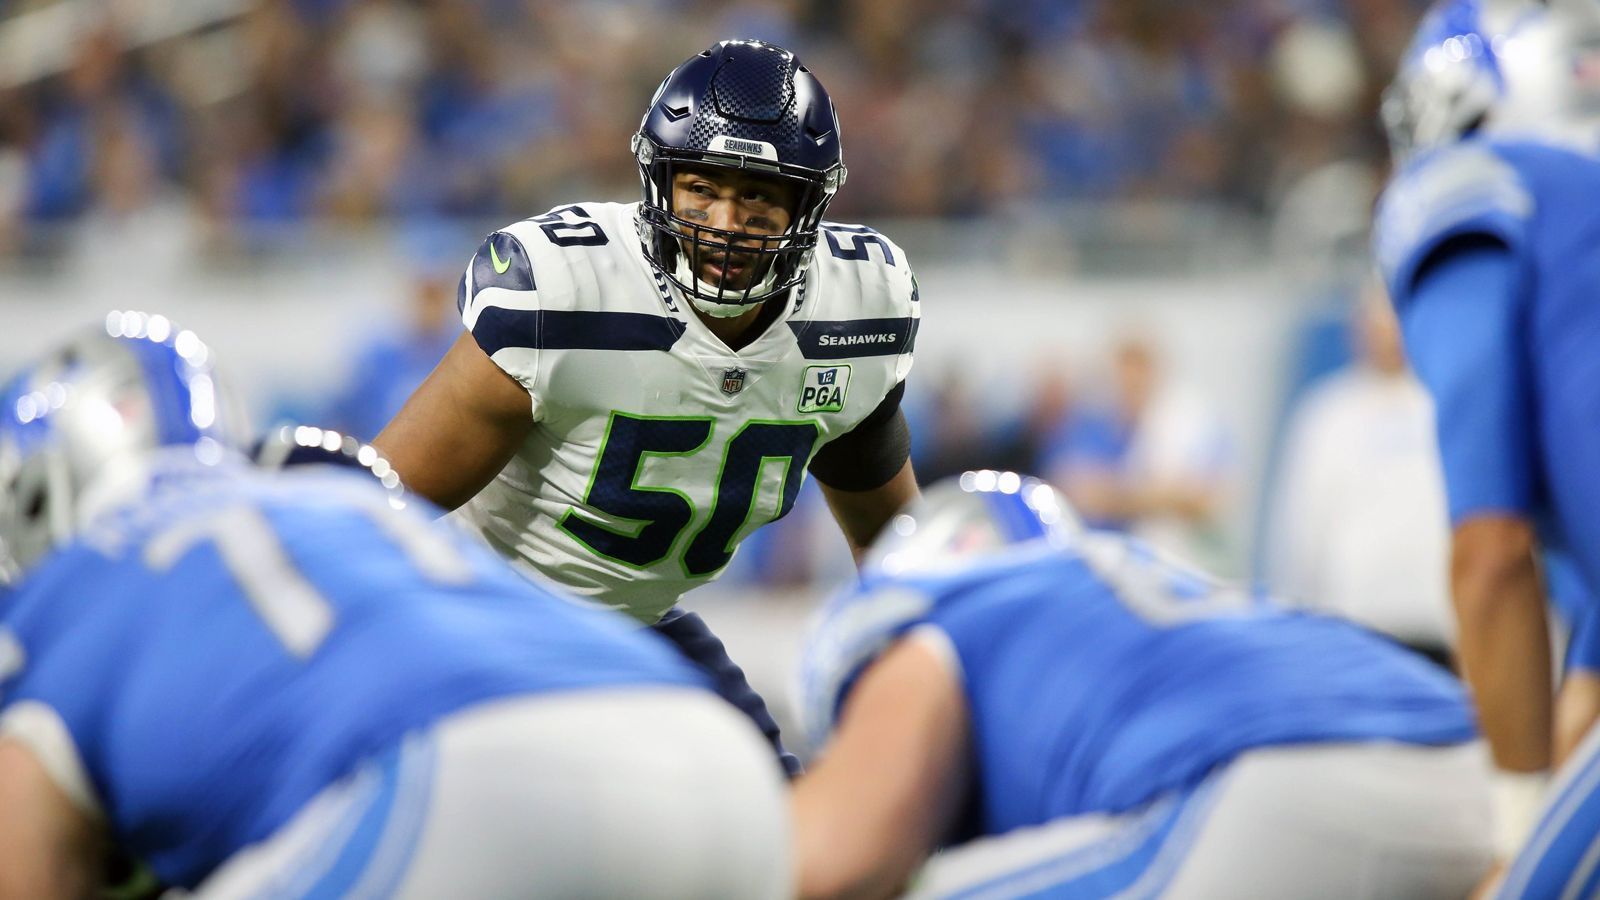 
                <strong>Seattle Seahawks: K.J. Wright</strong><br>
                Position: Linebacker
              